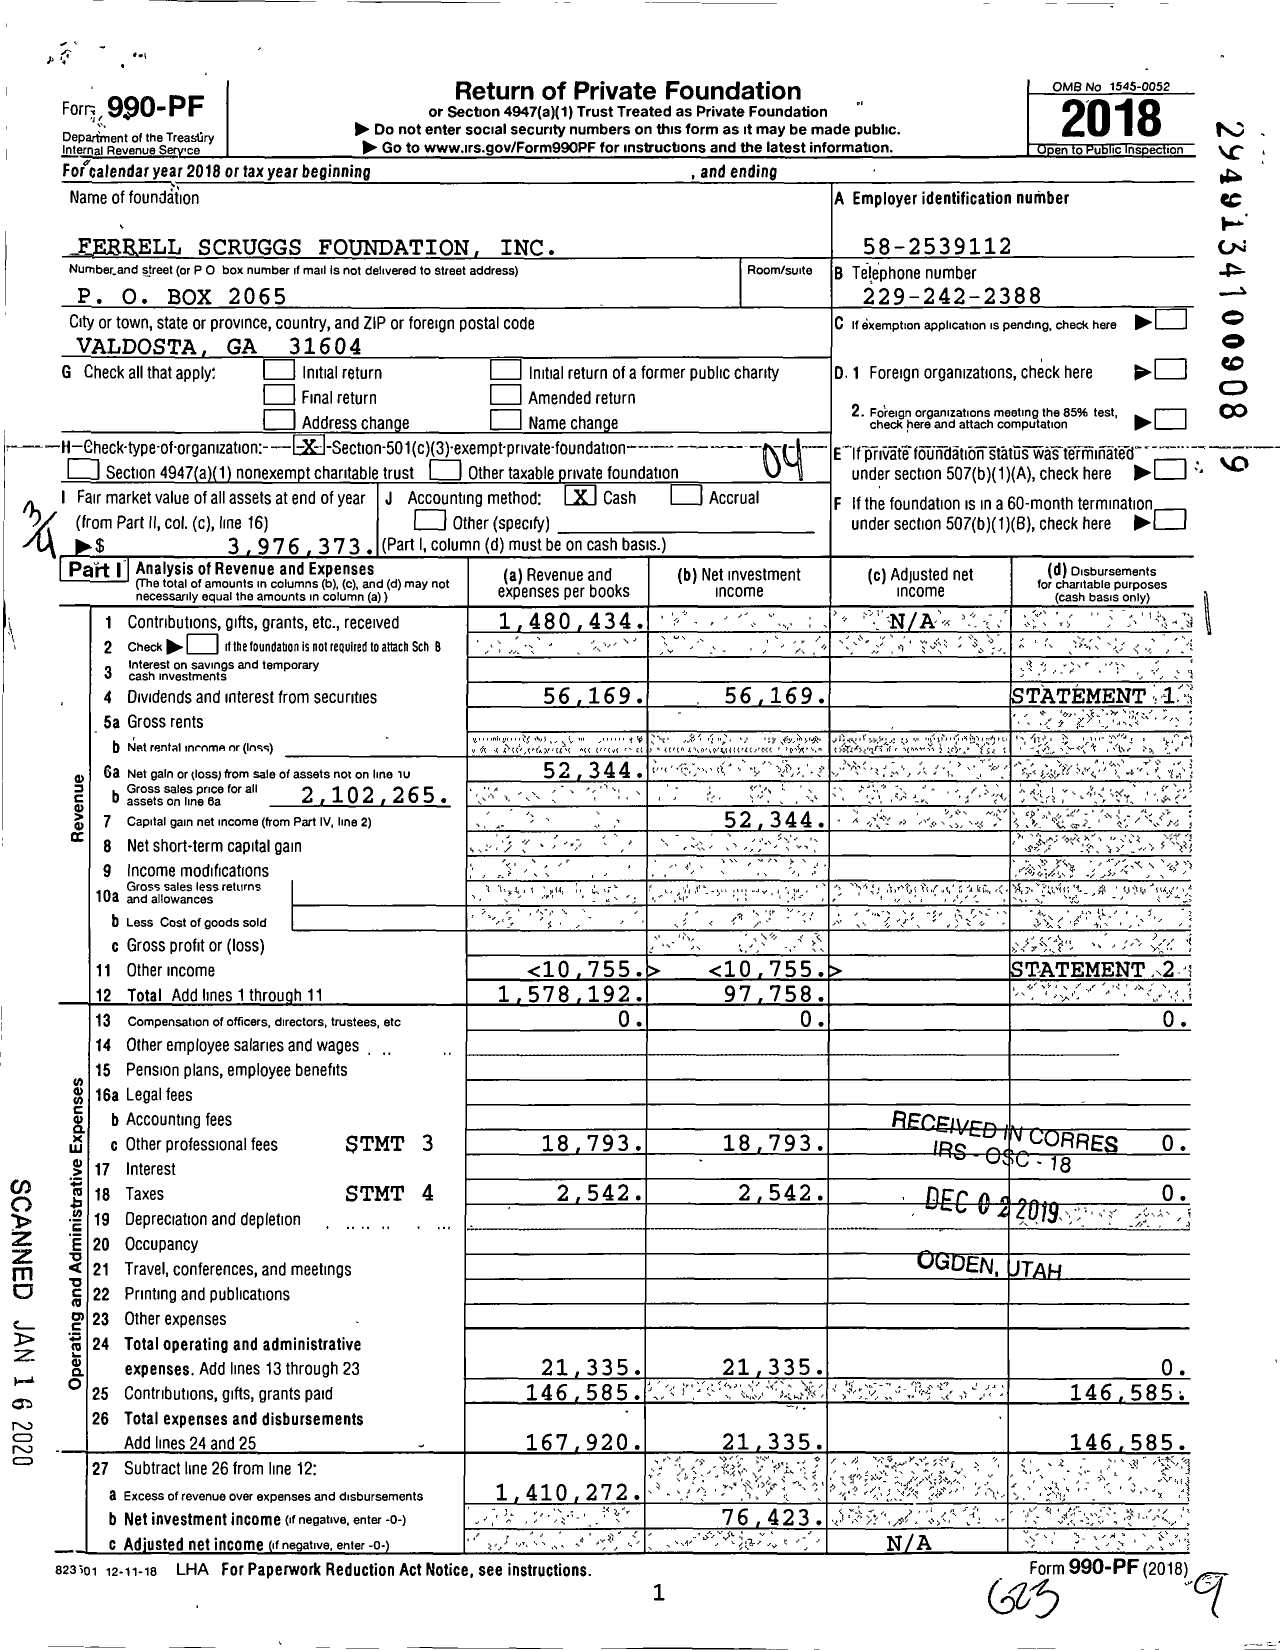 Image of first page of 2018 Form 990PF for Ferrell Scruggs Foundation